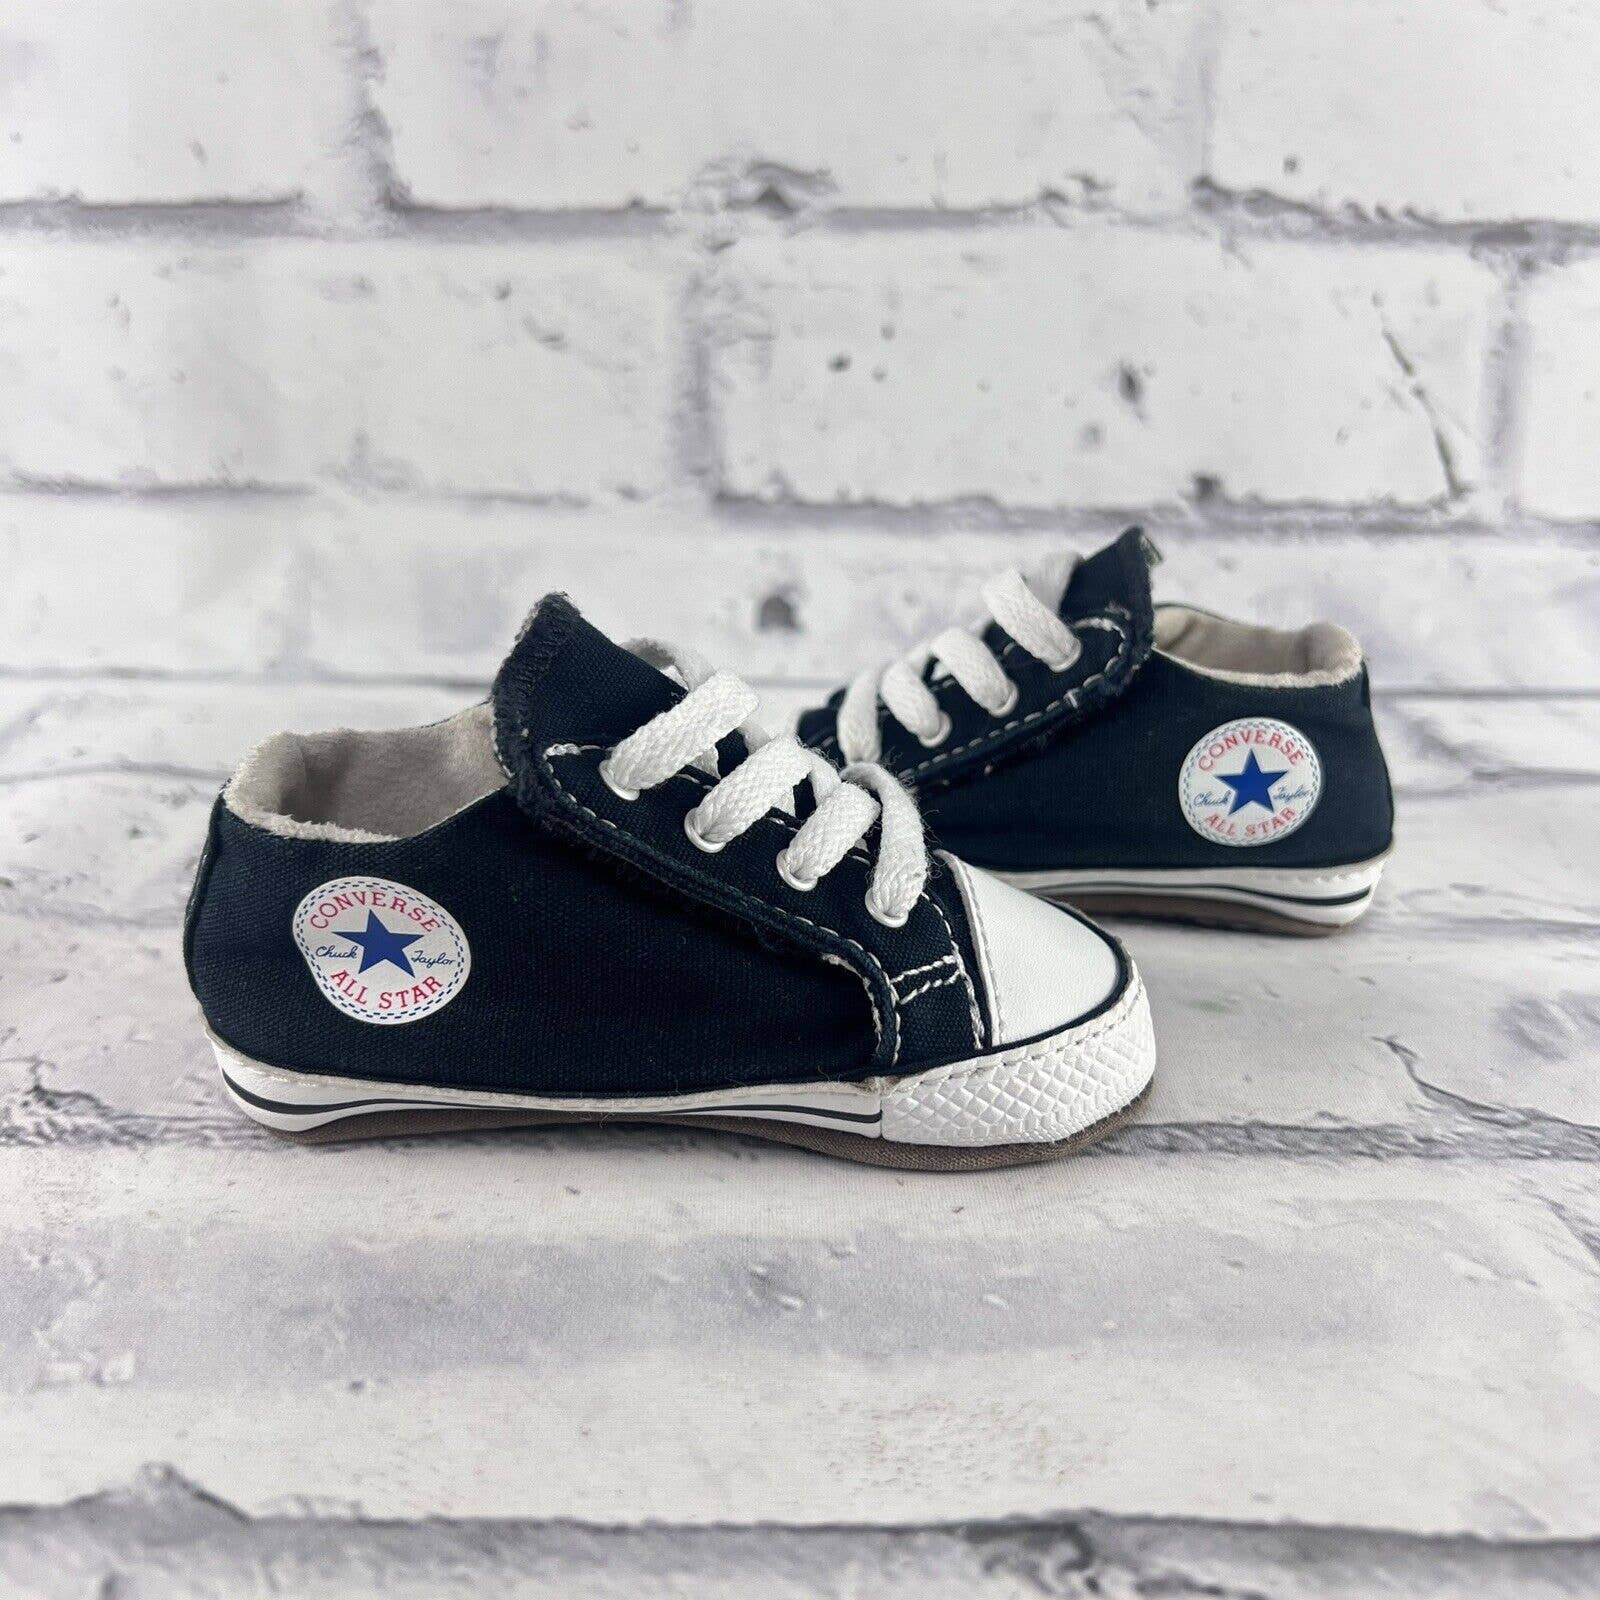 Converse Chuck Taylors All Star Black Cribster Infant Baby Size 3 Black & White